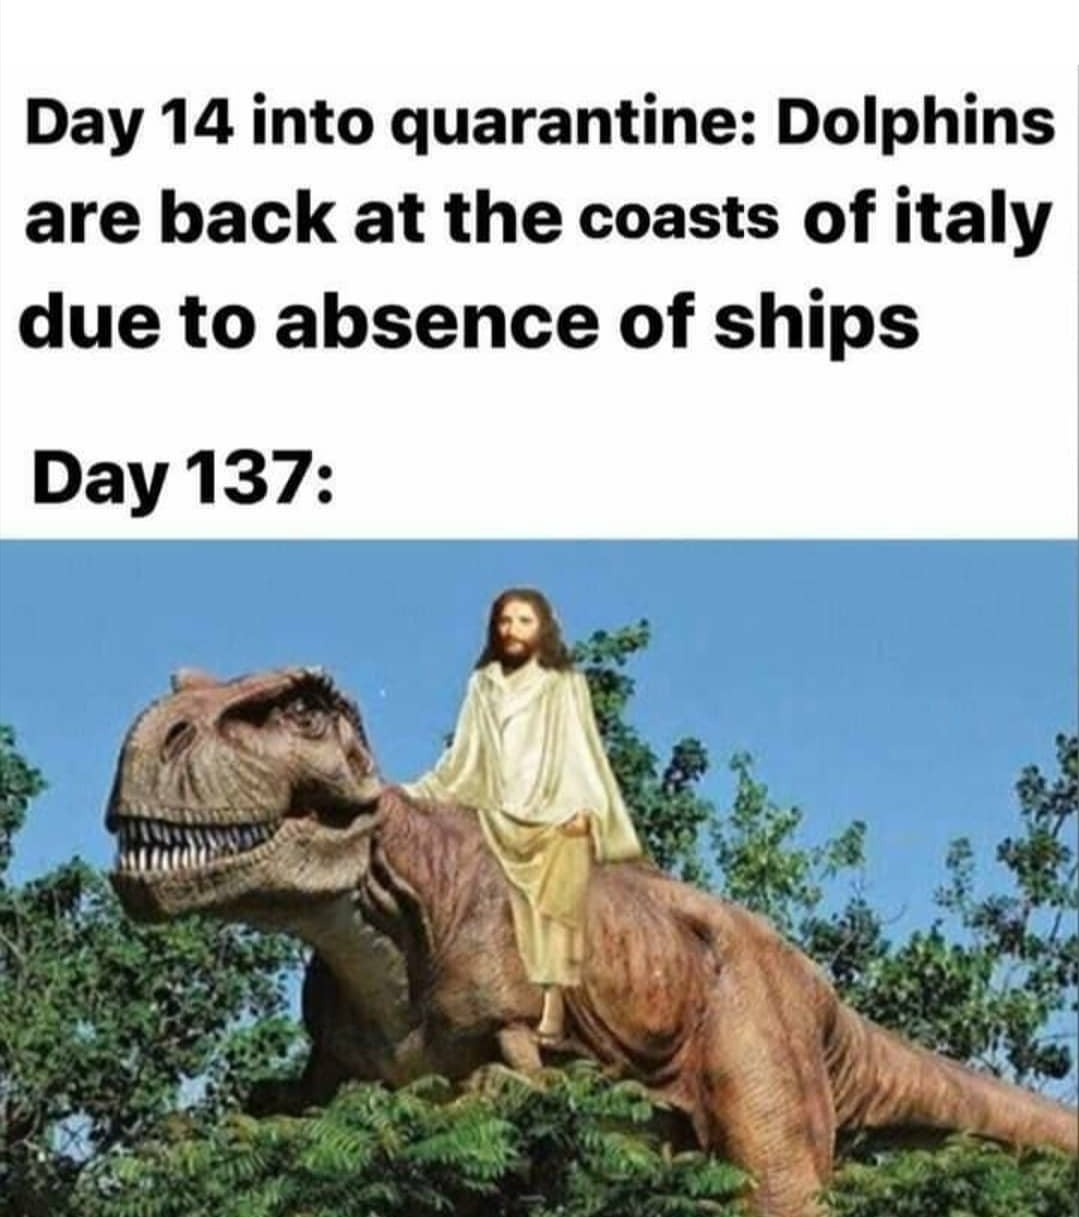 ride t rex - Day 14 into quarantine Dolphins are back at the coasts of italy due to absence of ships Day 137